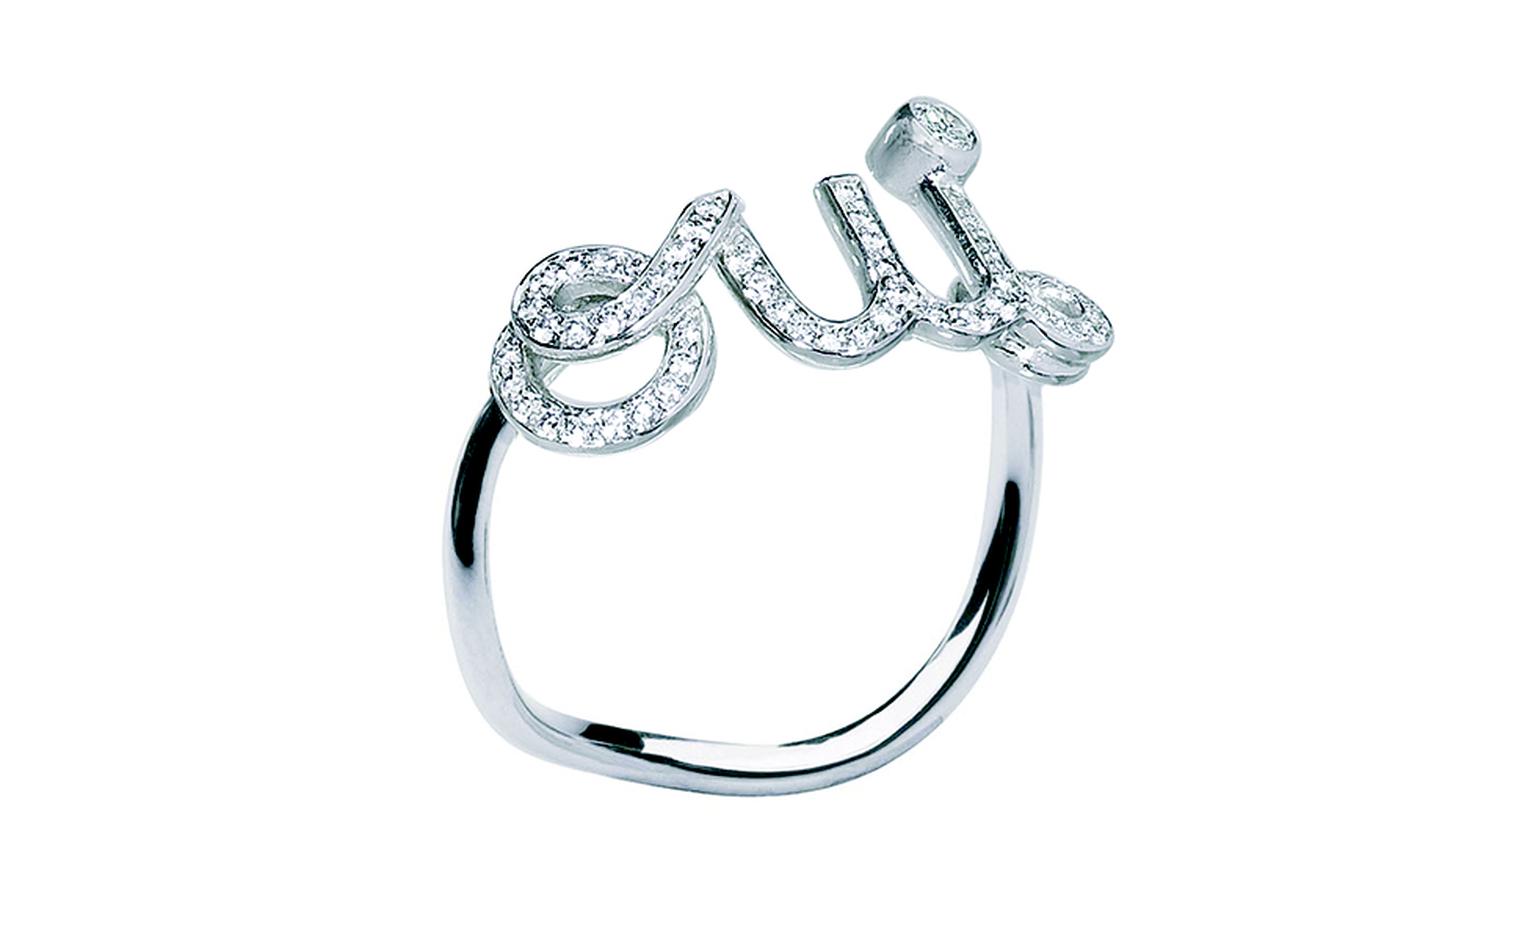 Dior Fine Jewels 'Oui' ring in white gold and diamonds £1,850